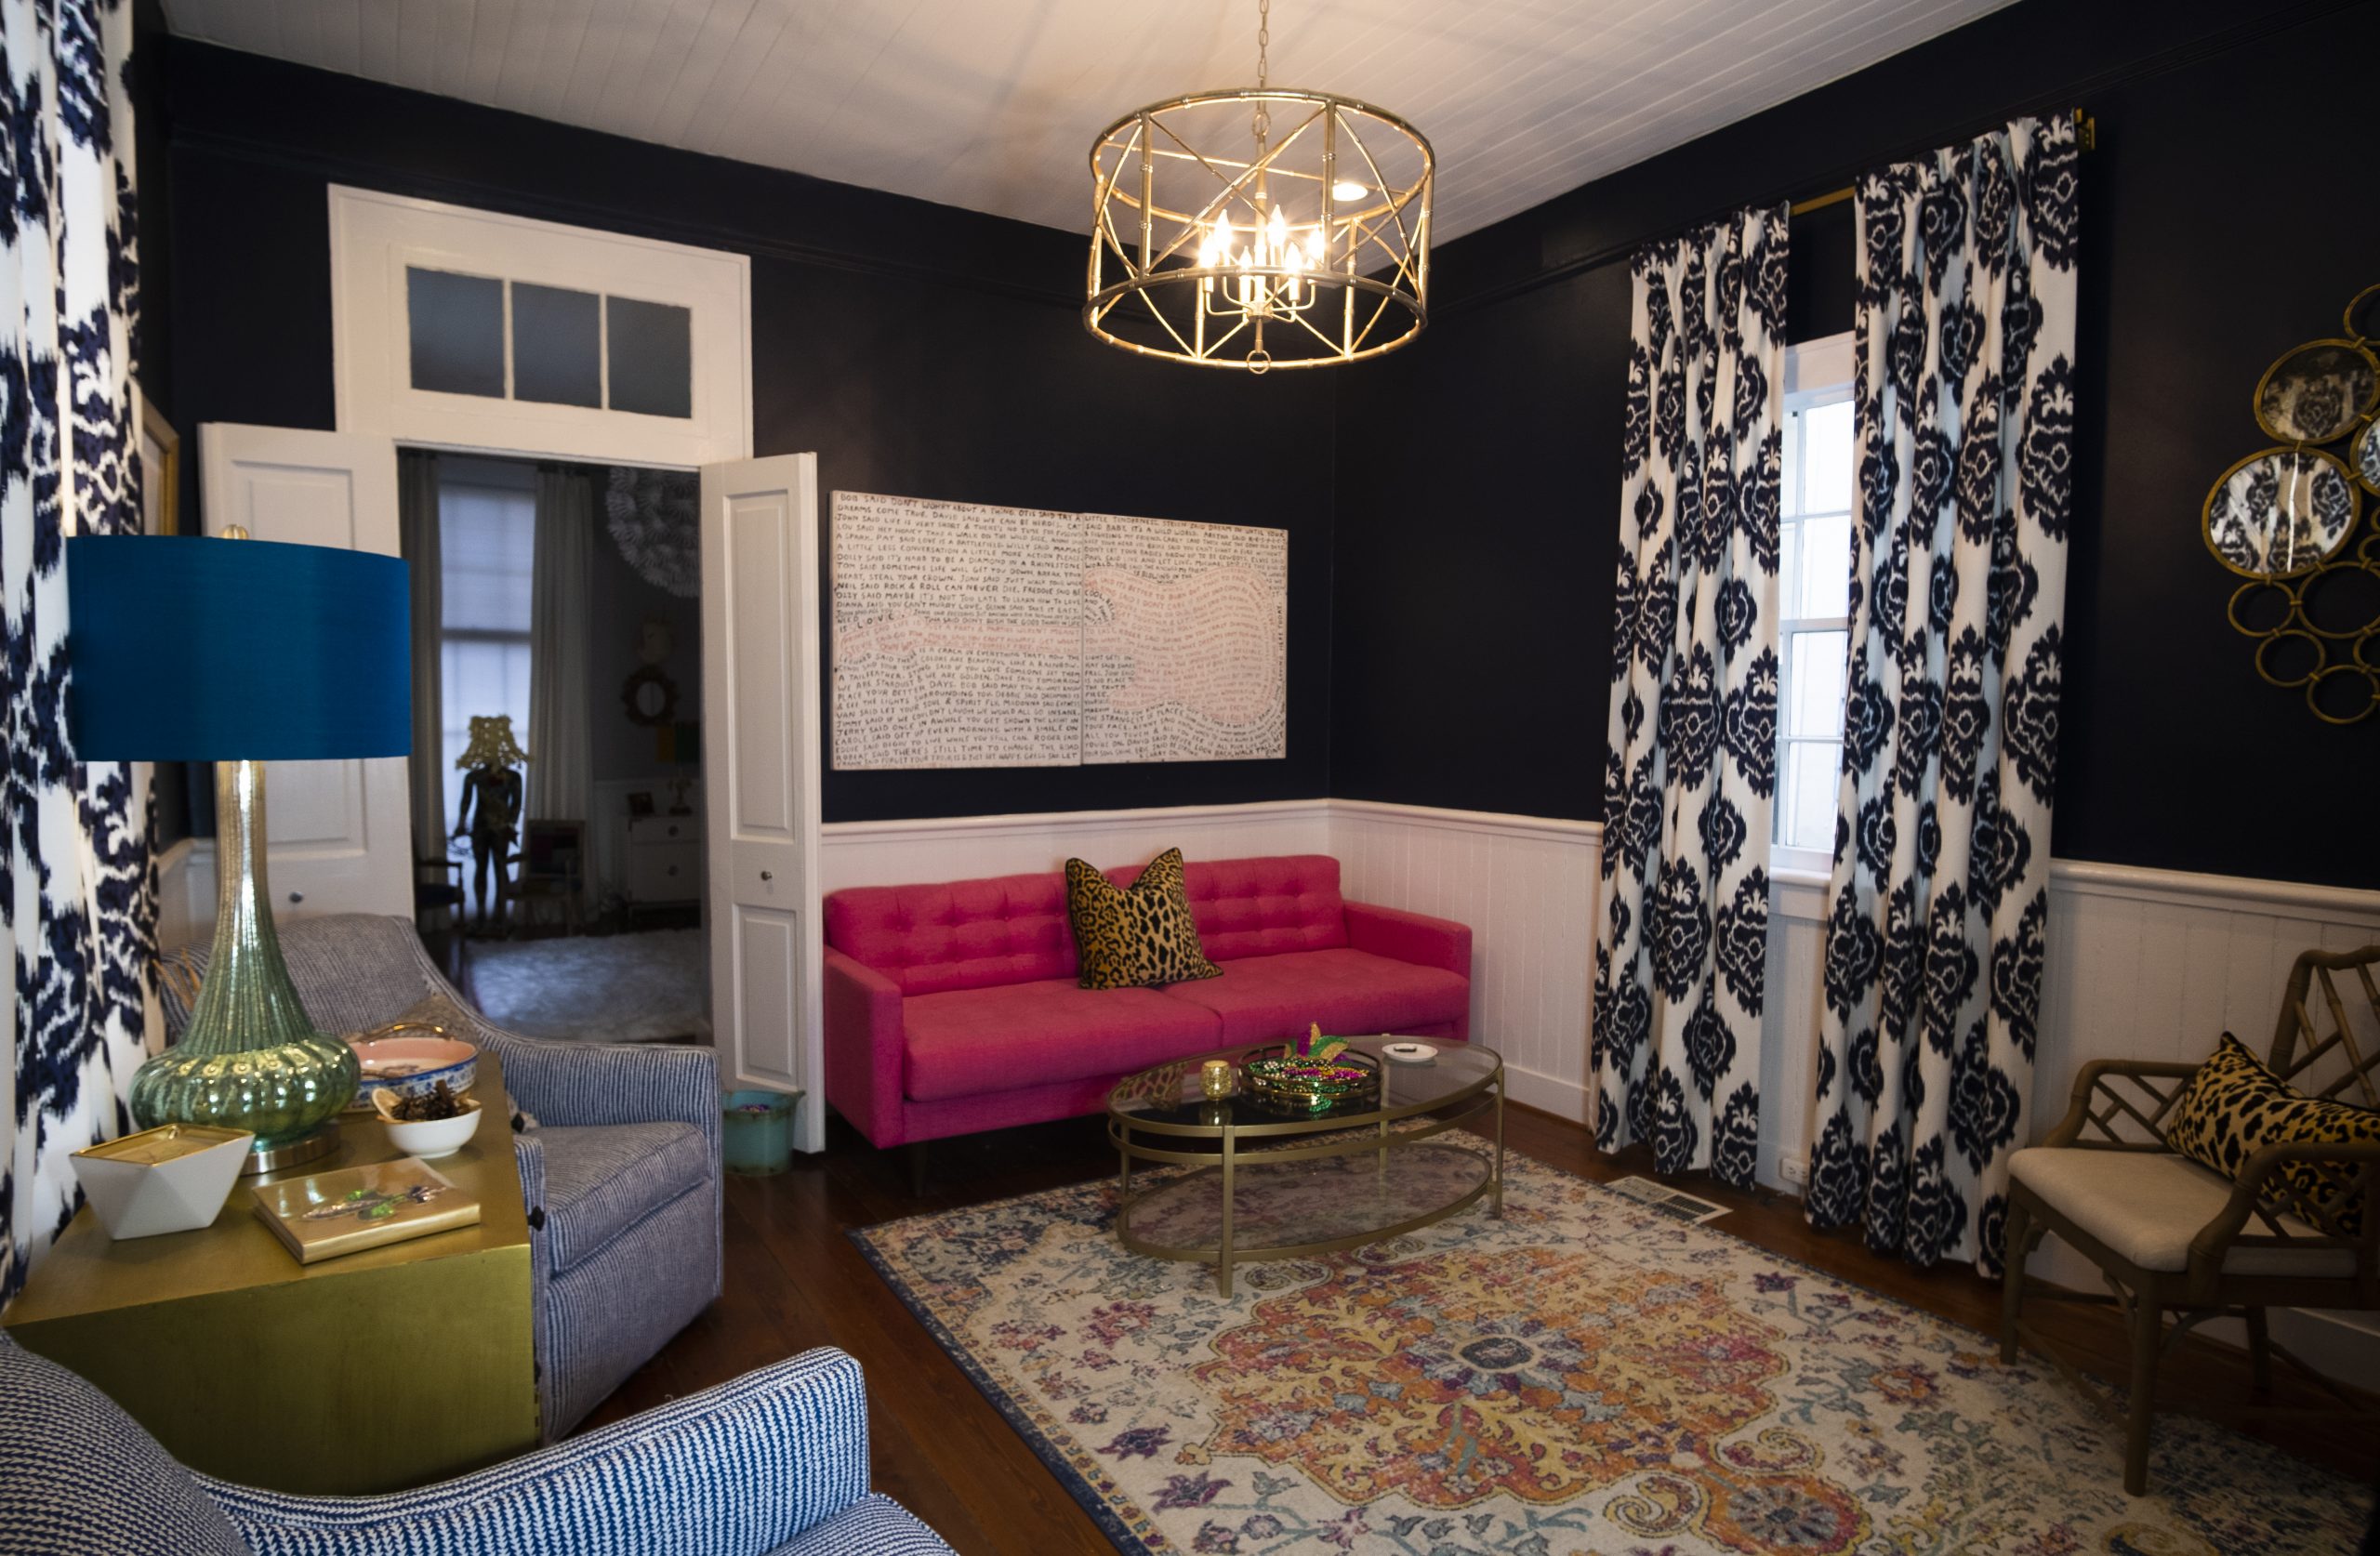 new orleans, staging, stager, bespoke staging and design, bespoke nola staging and design, home stager, home staging, real estate staging, real estate stager, property staging